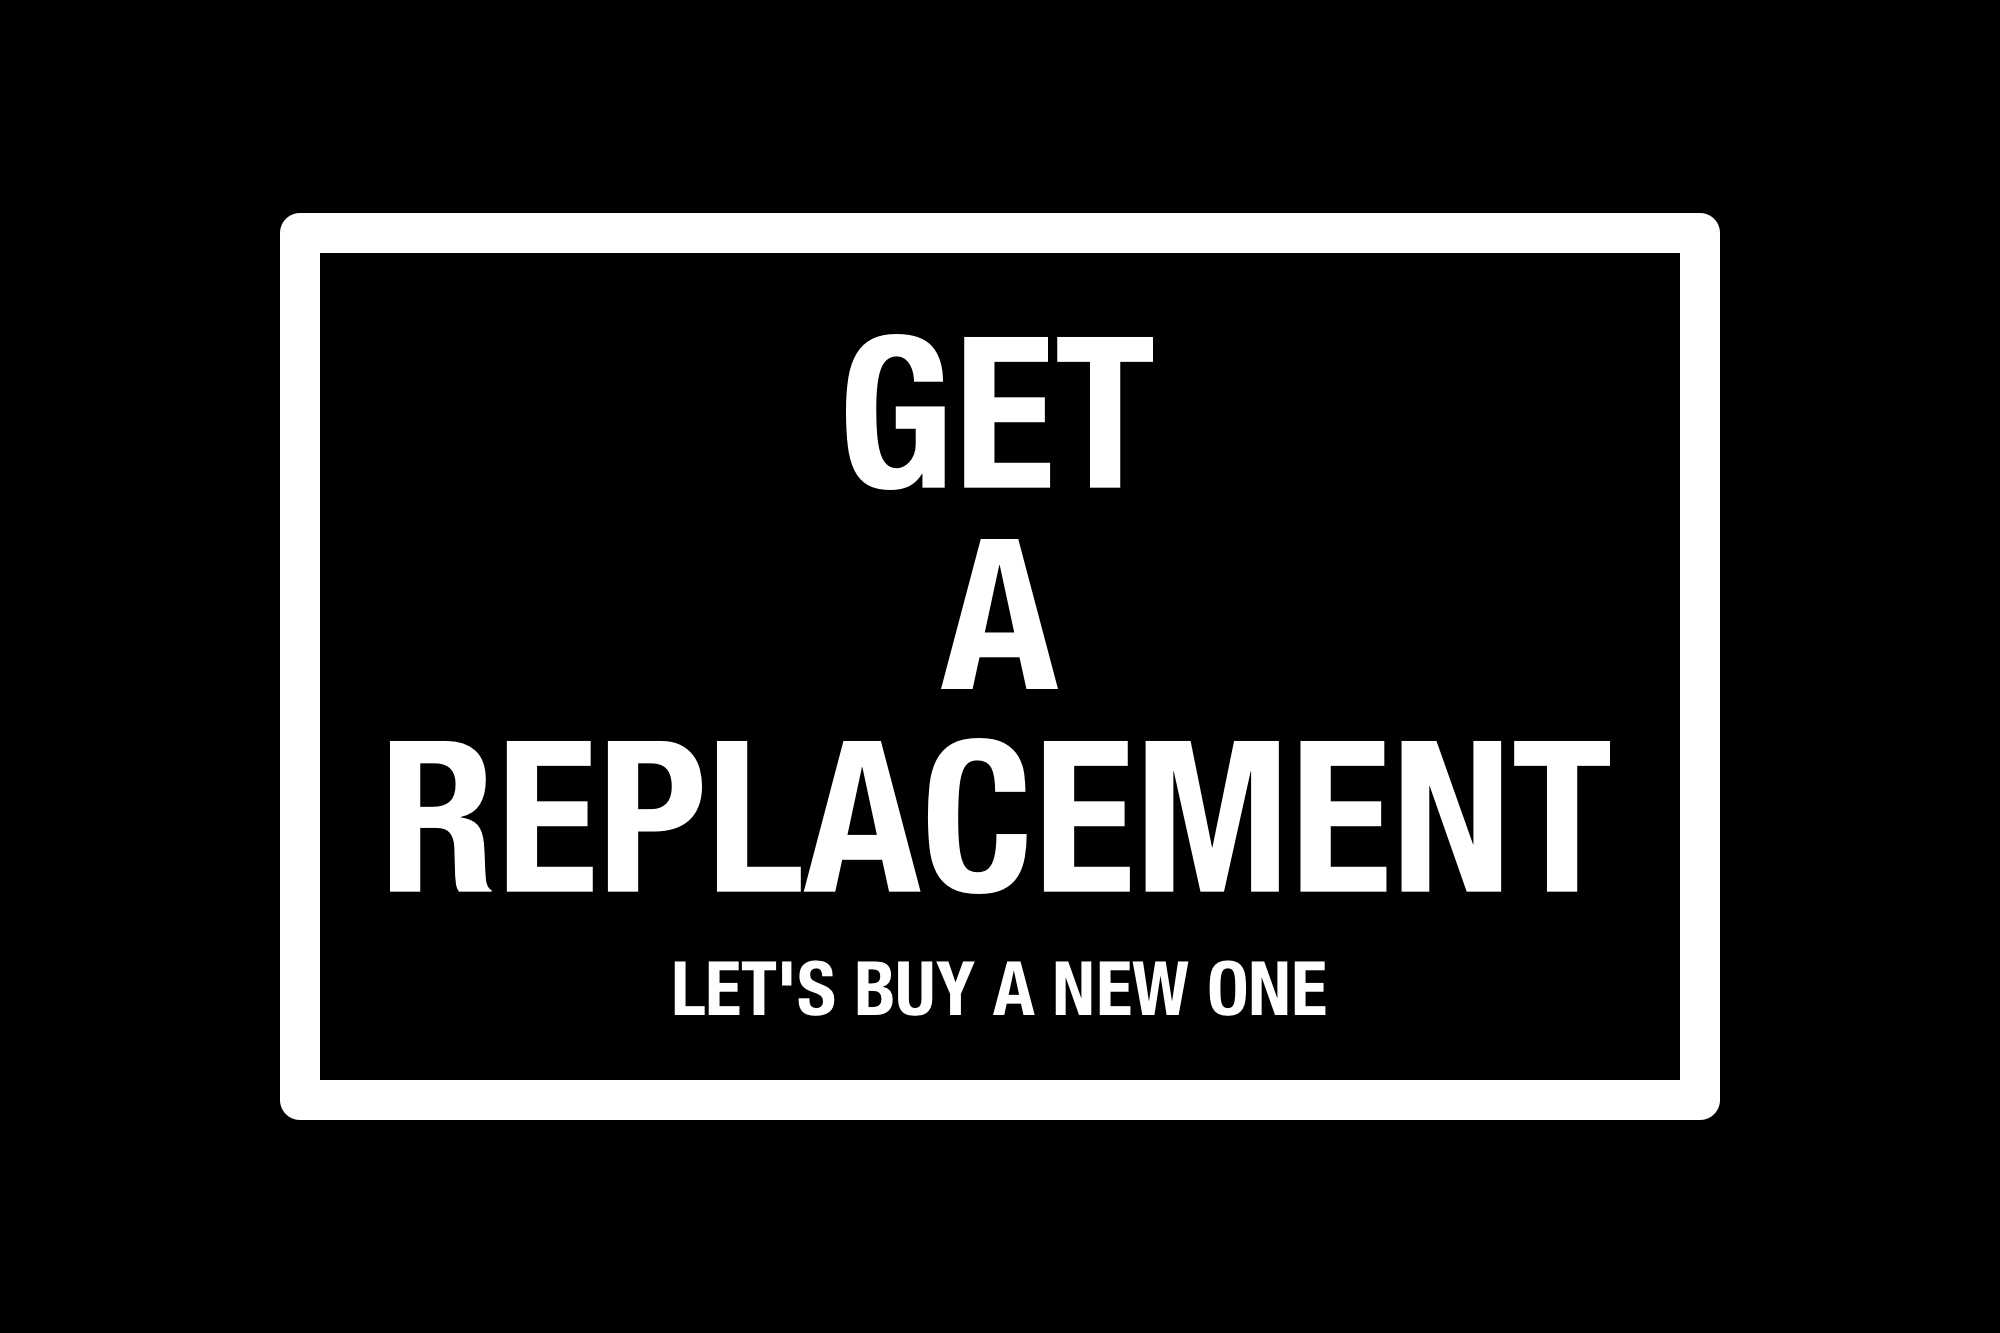 Get a Replacement